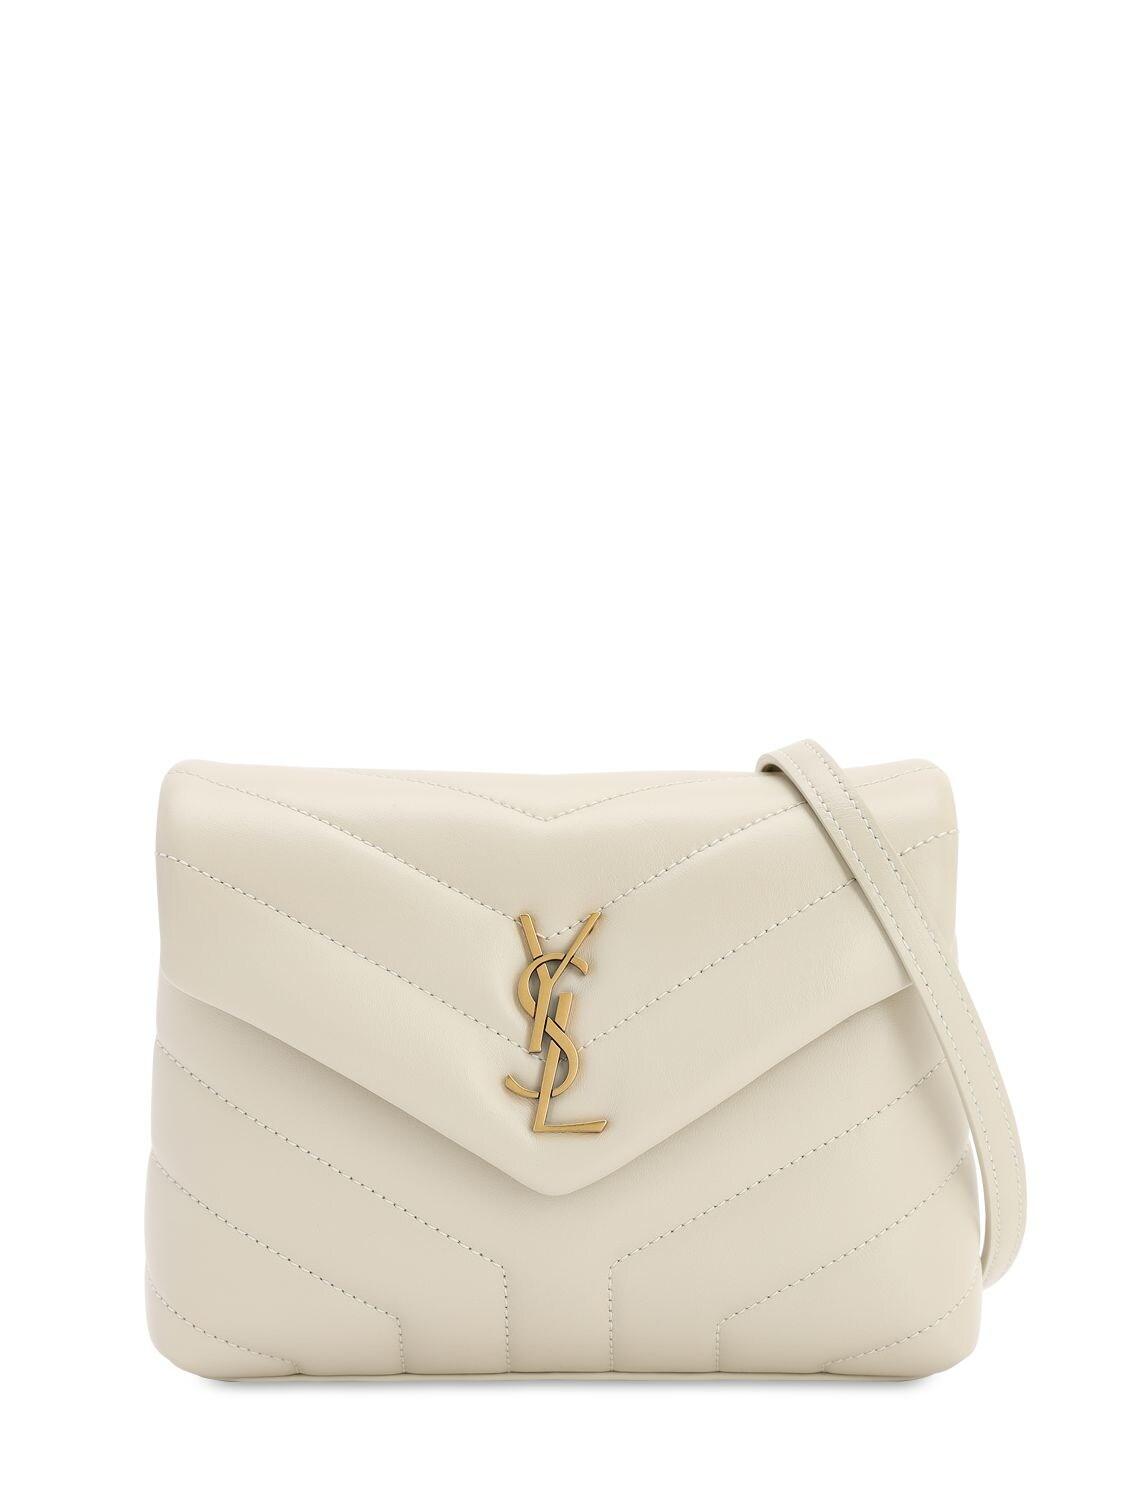 Saint Laurent Cream Loulou Toy Bag in Natural | Lyst